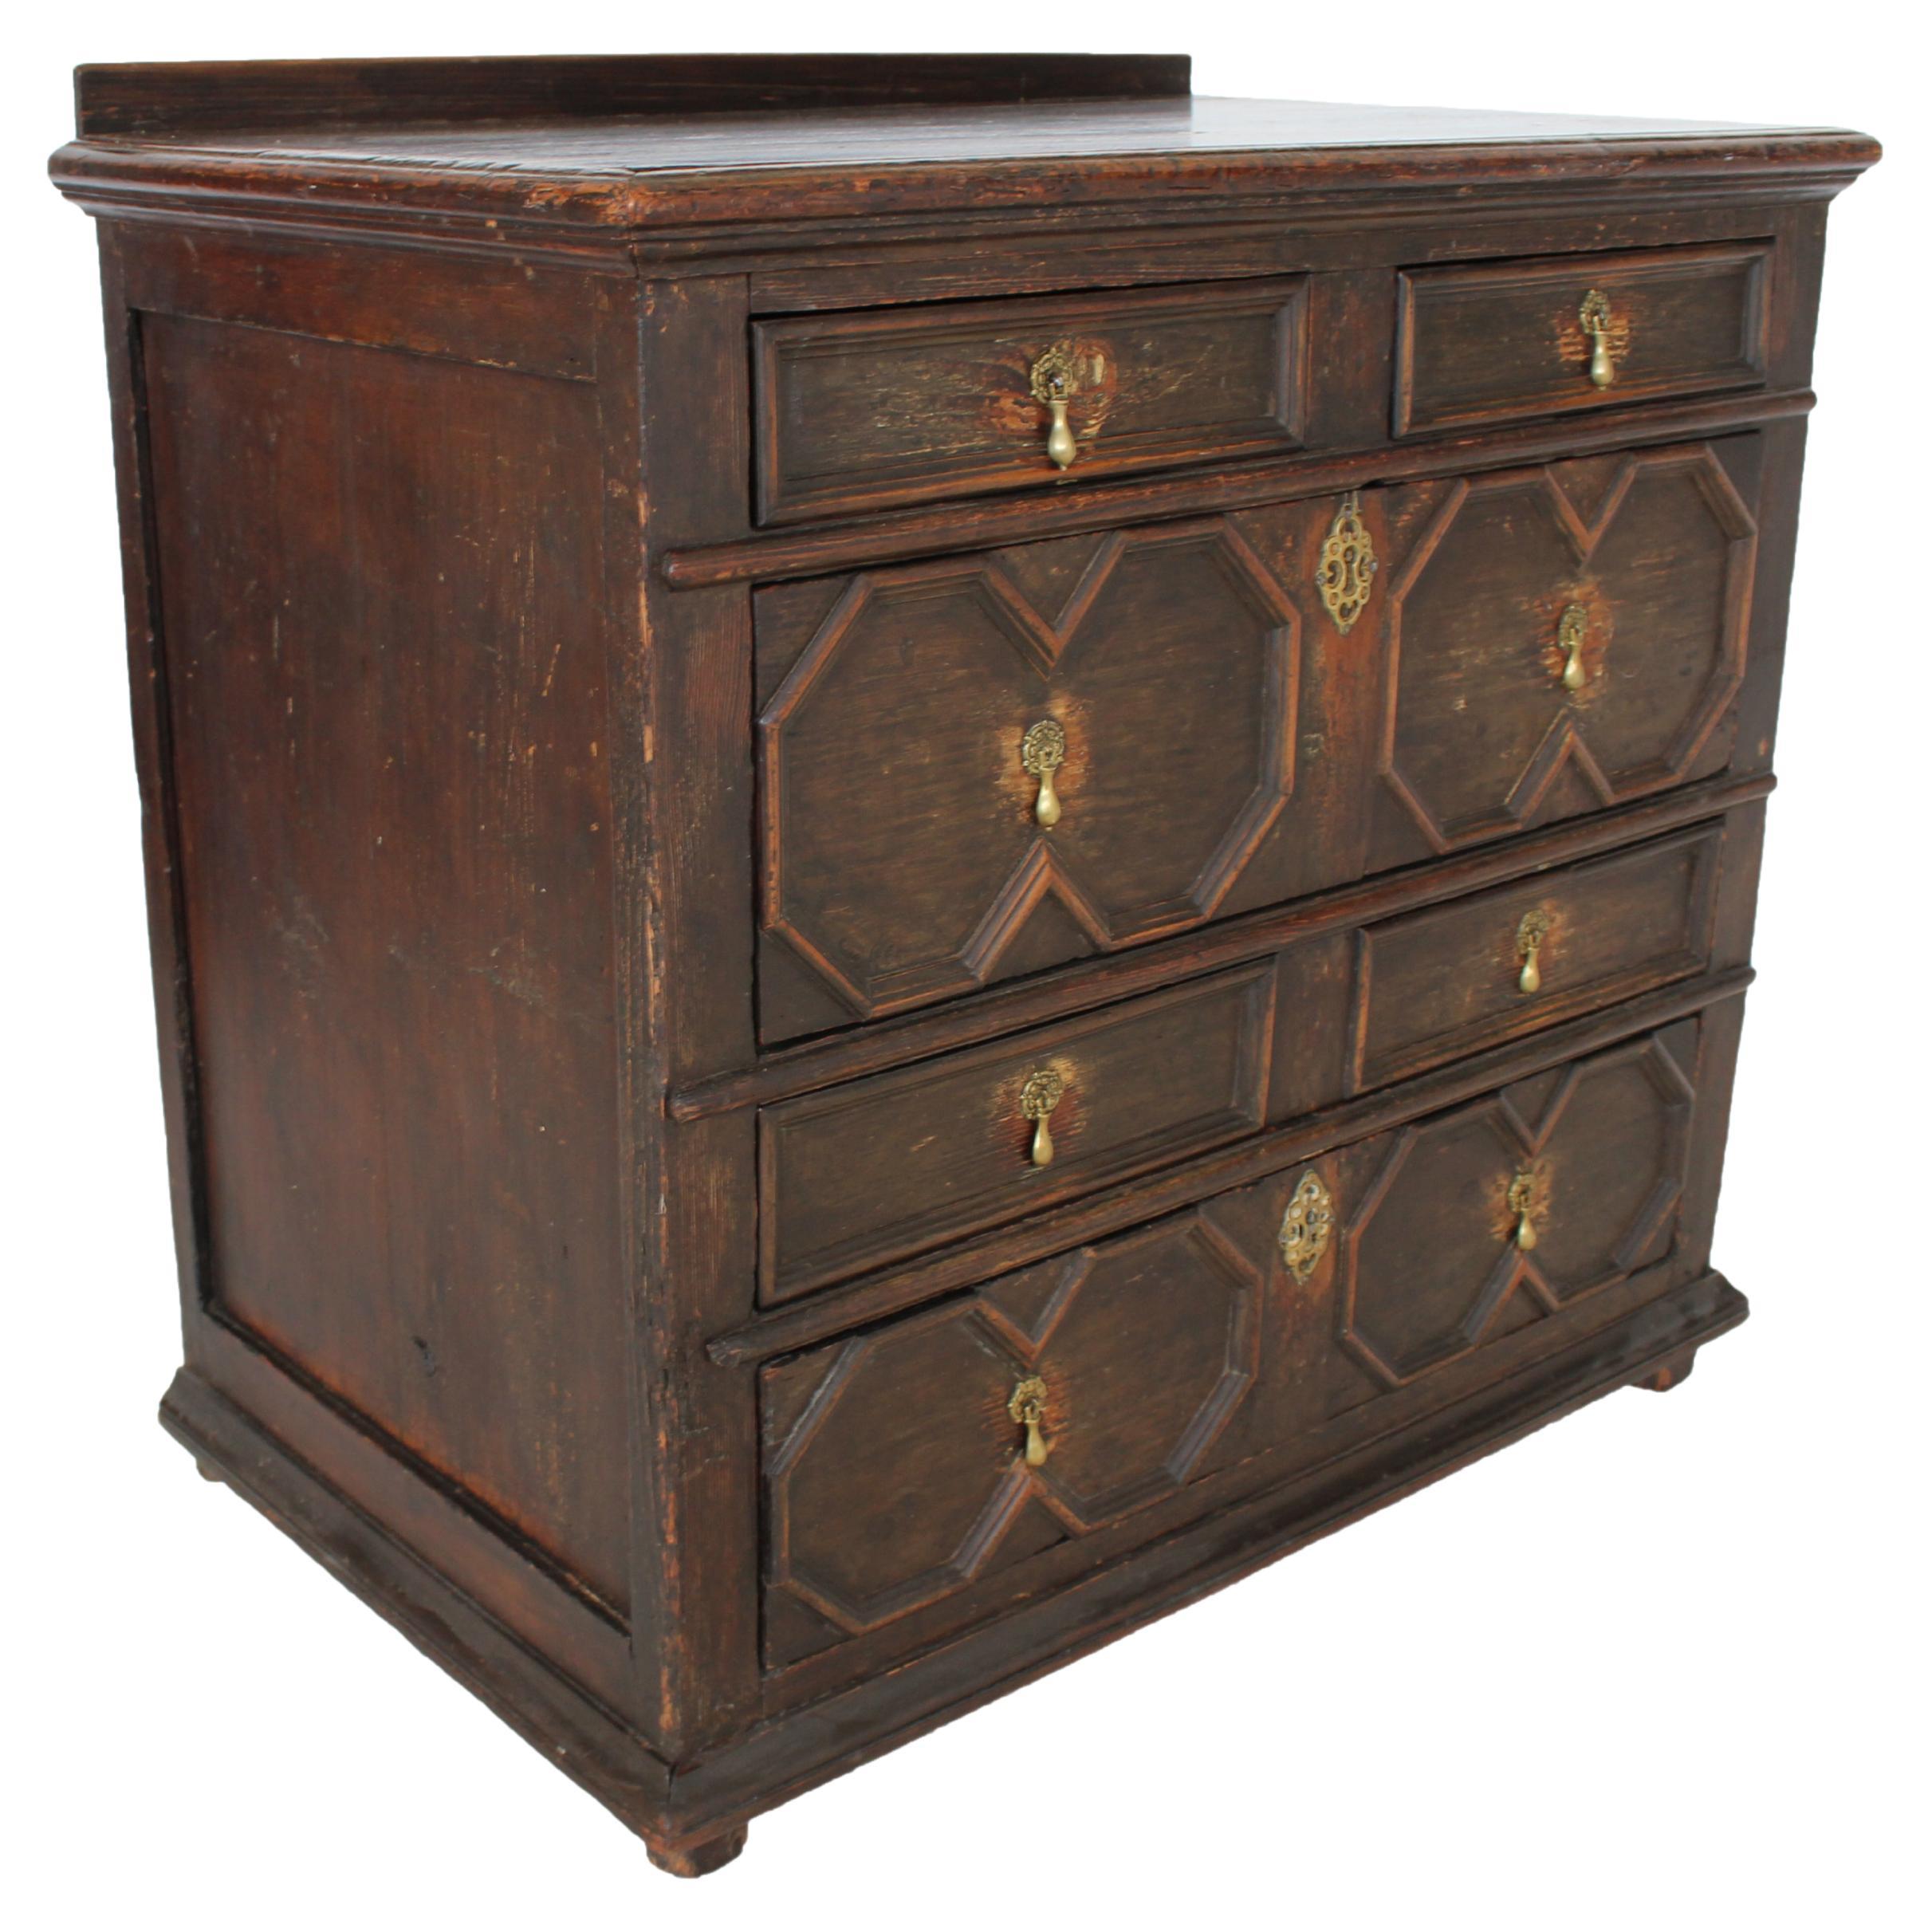 Chest of drawers.
Made with pine.
With five drawers.
Detailed with brass.
18th century, England.